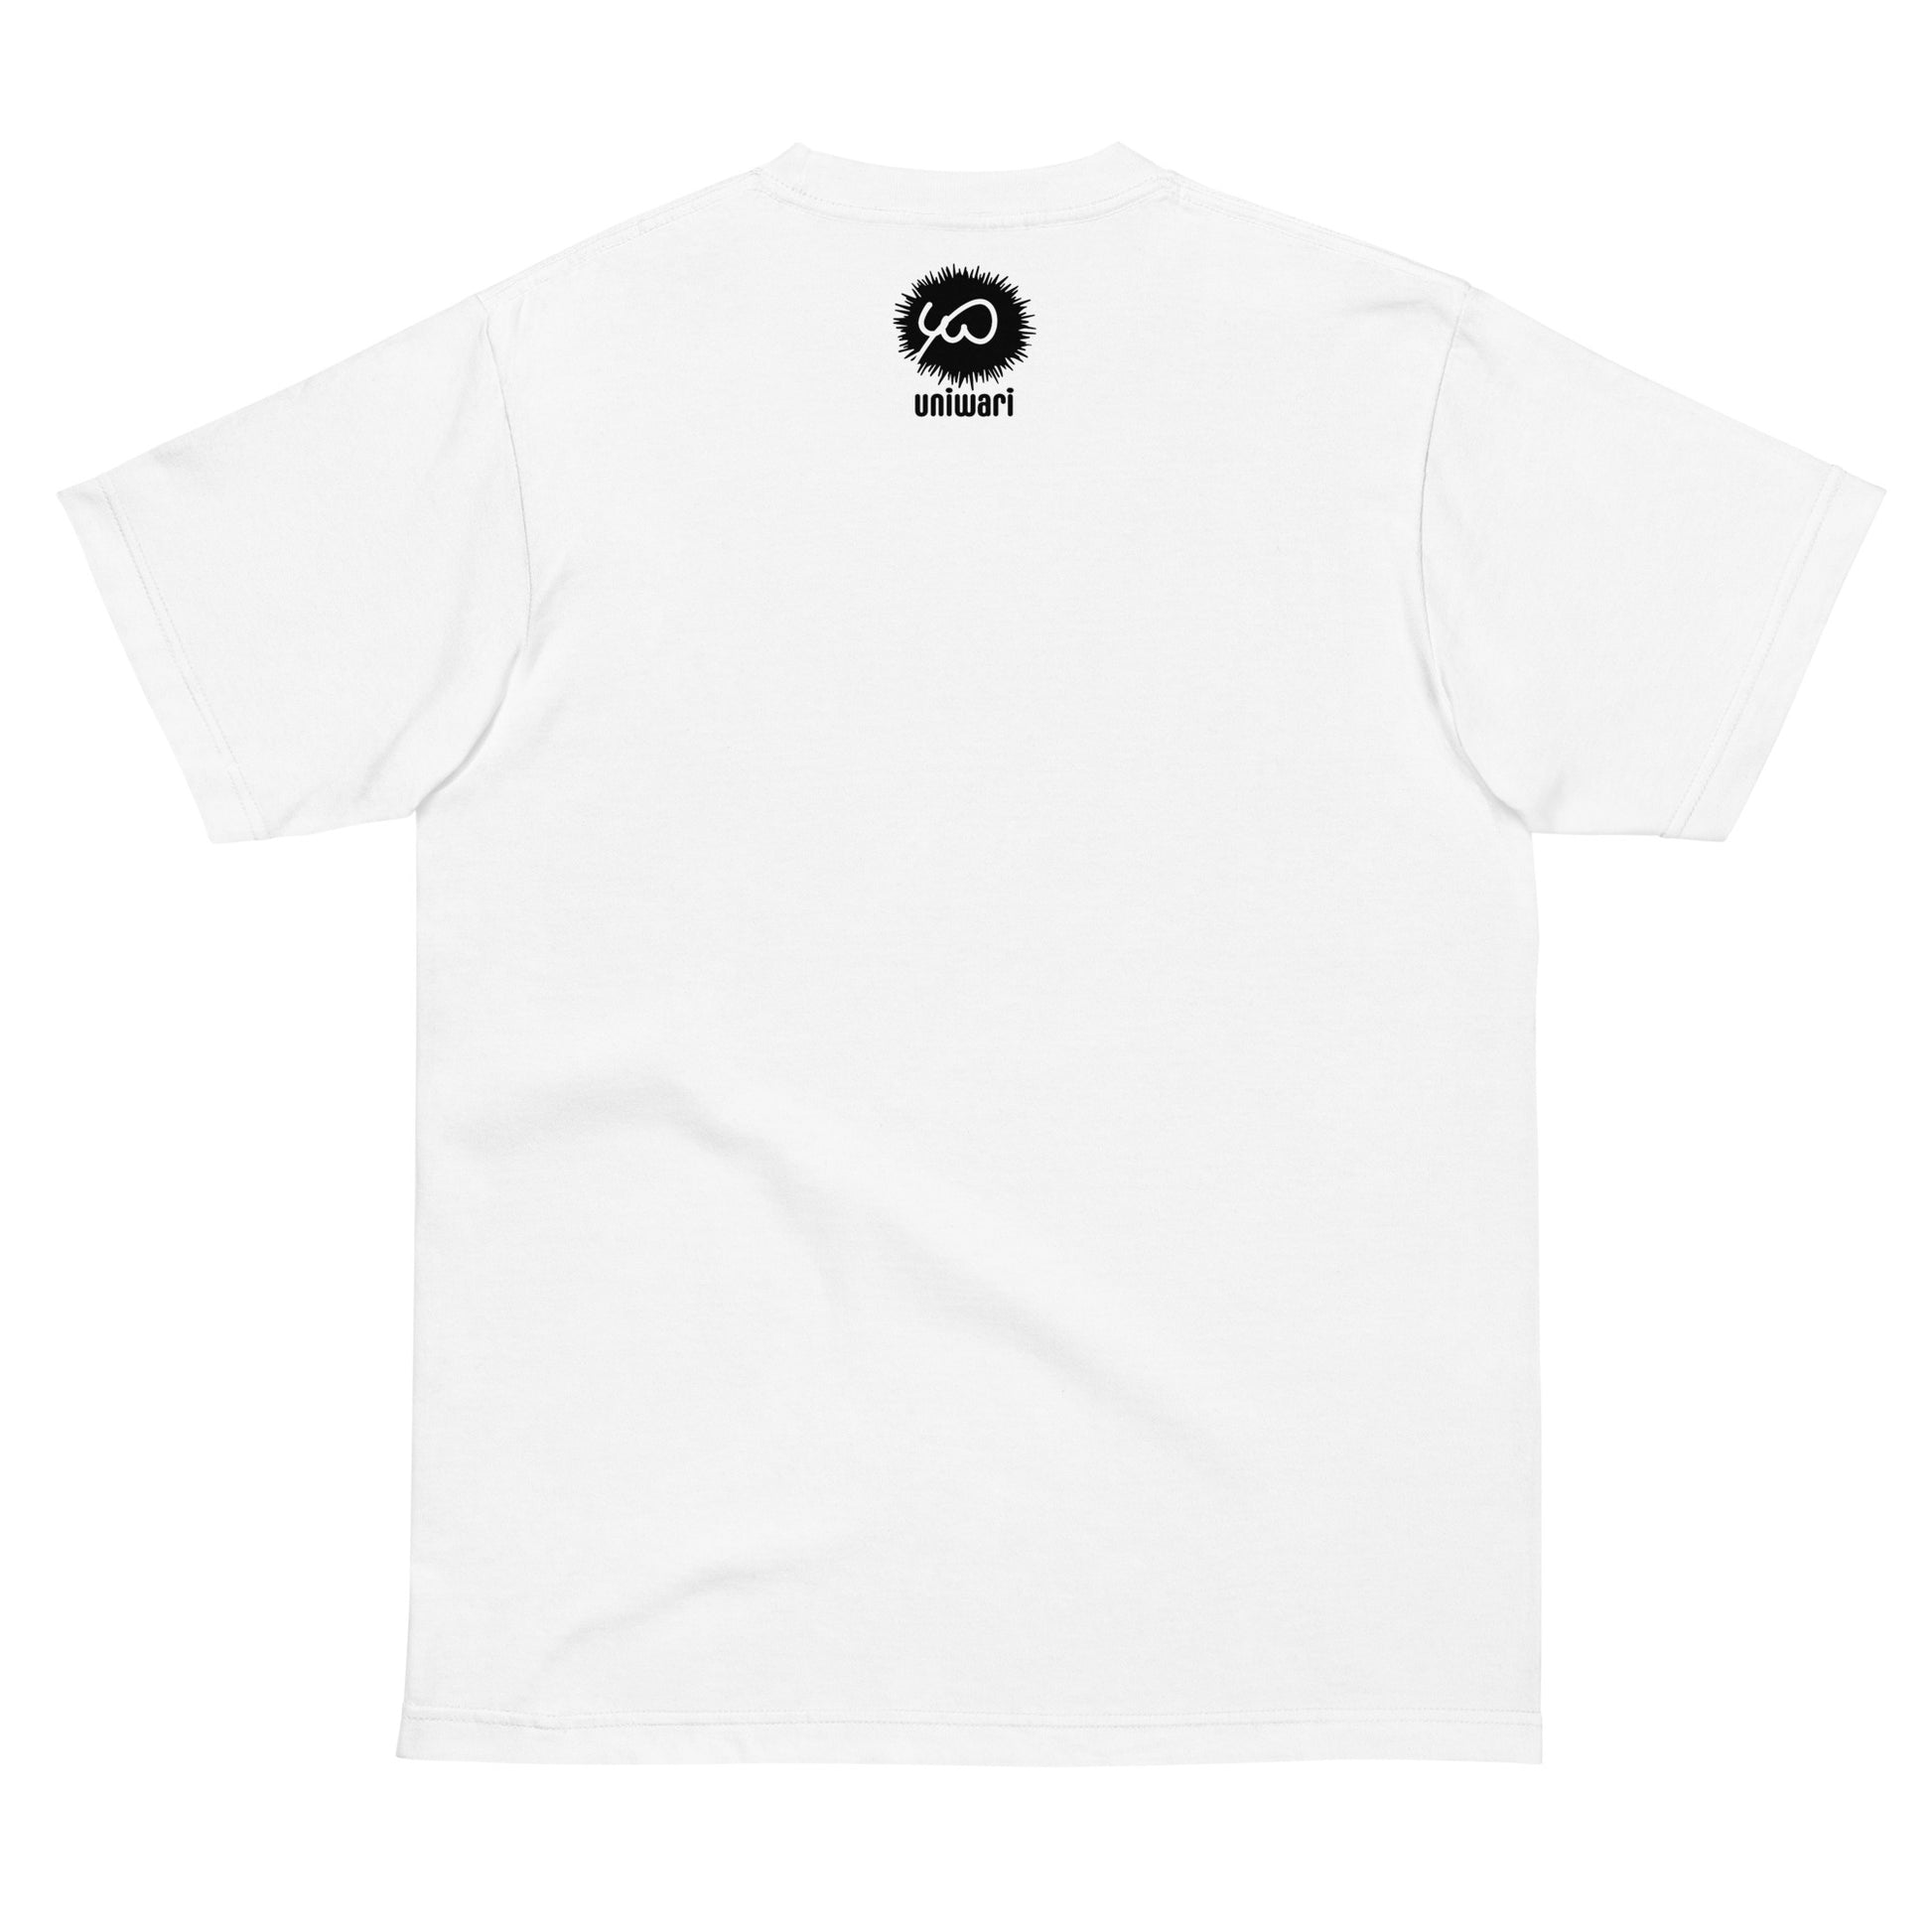 White High Quality Tee - Front Design with an Black Uniwari Logo - Back Design with Weekdays in Japanese and Blue back ground